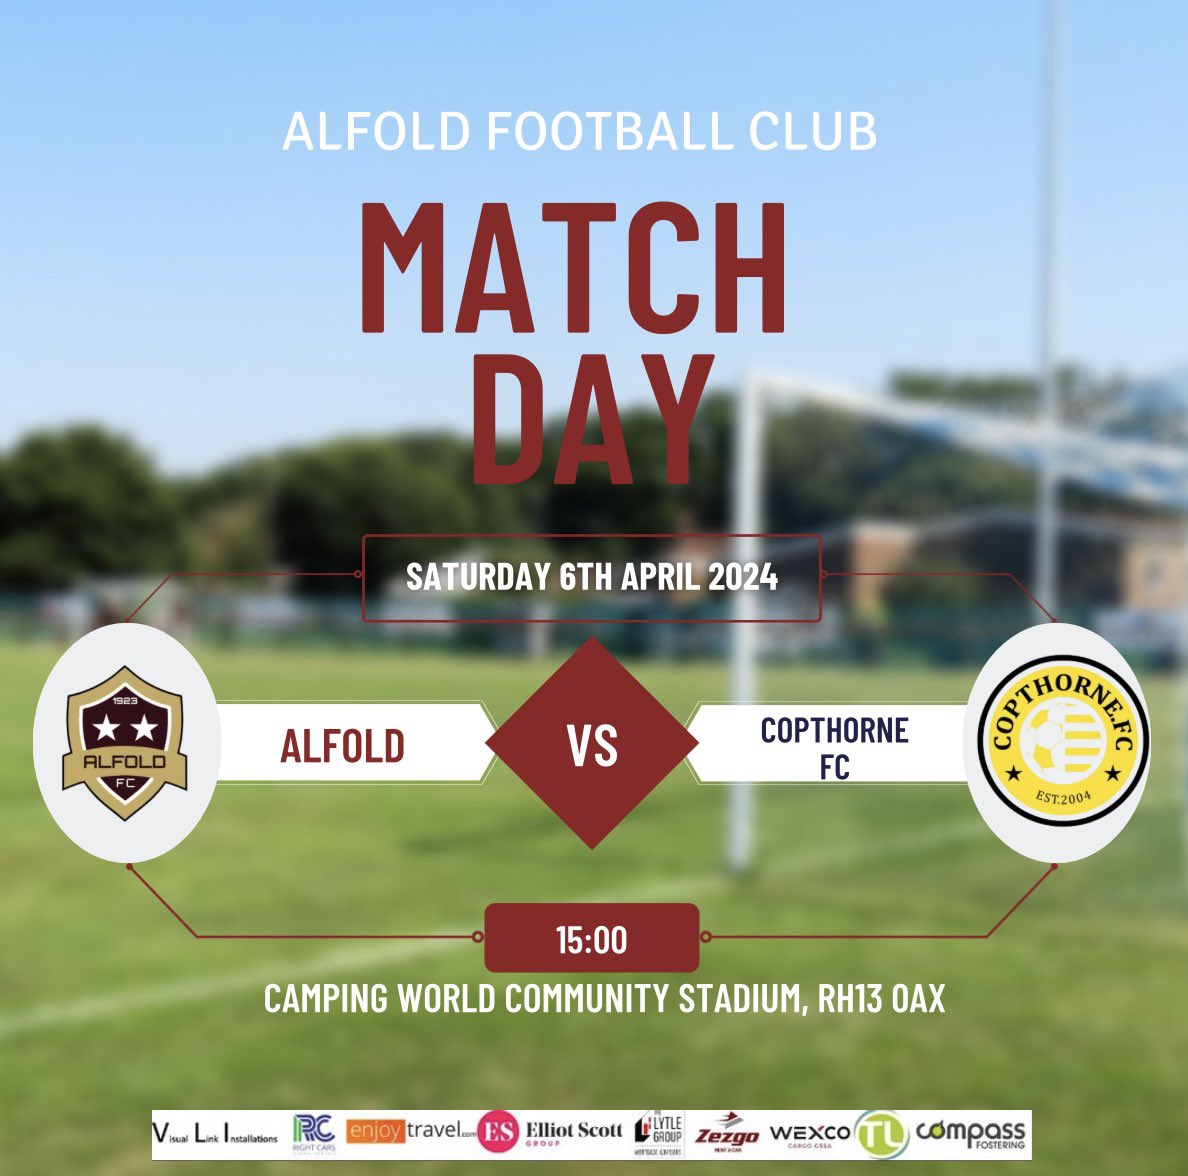 TODAYS MATCH: We are away today to @CopthorneFC! Come down and Support the lads⚽️ 🆚 @CopthorneFC 🏟️RH13 0AX, Camping world community stadium 🗓️Saturday 6th April 🕛15:00 KO ⚽️#UTF